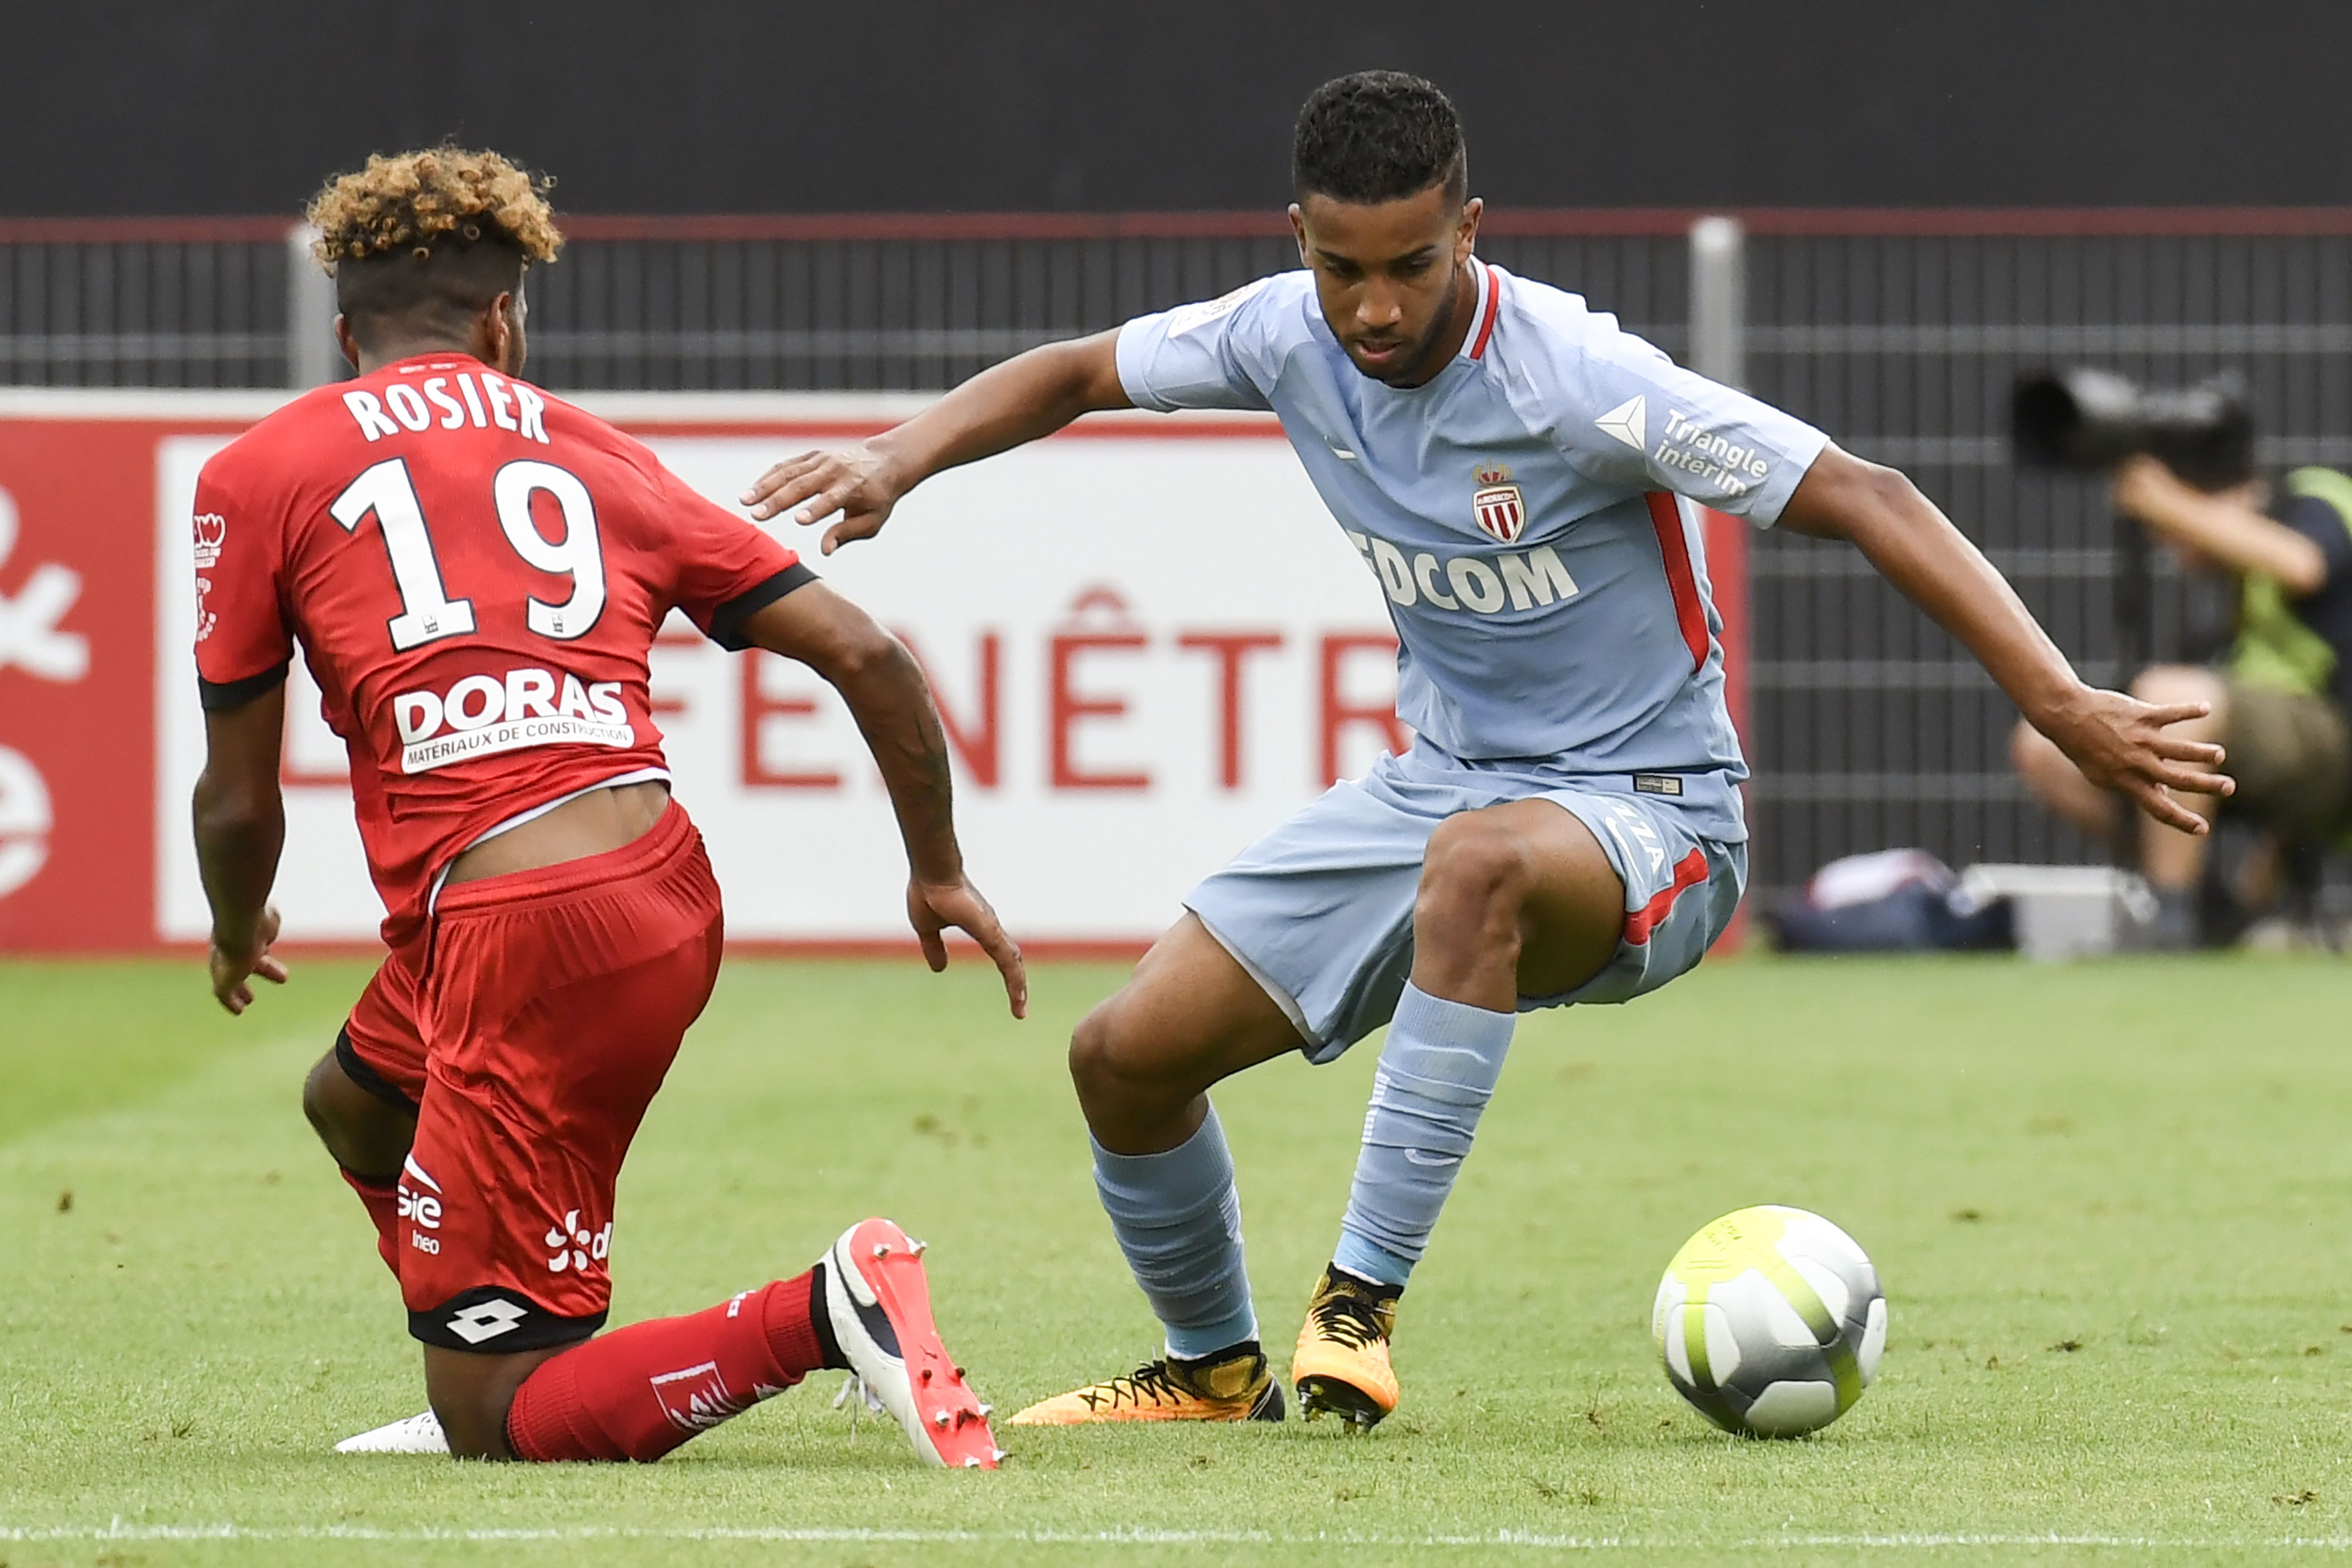 Monaco's French midfielder Thomas Lemar (R) vies with Dijon's French defender Valentin Rosier (L) during the French L1 football match between Dijon FCO and AS Monaco, on August 13, 2017 at Gaston Gerard stadium in Dijon, northern France. / AFP PHOTO / PHILIPPE DESMAZES        (Photo credit should read PHILIPPE DESMAZES/AFP/Getty Images)